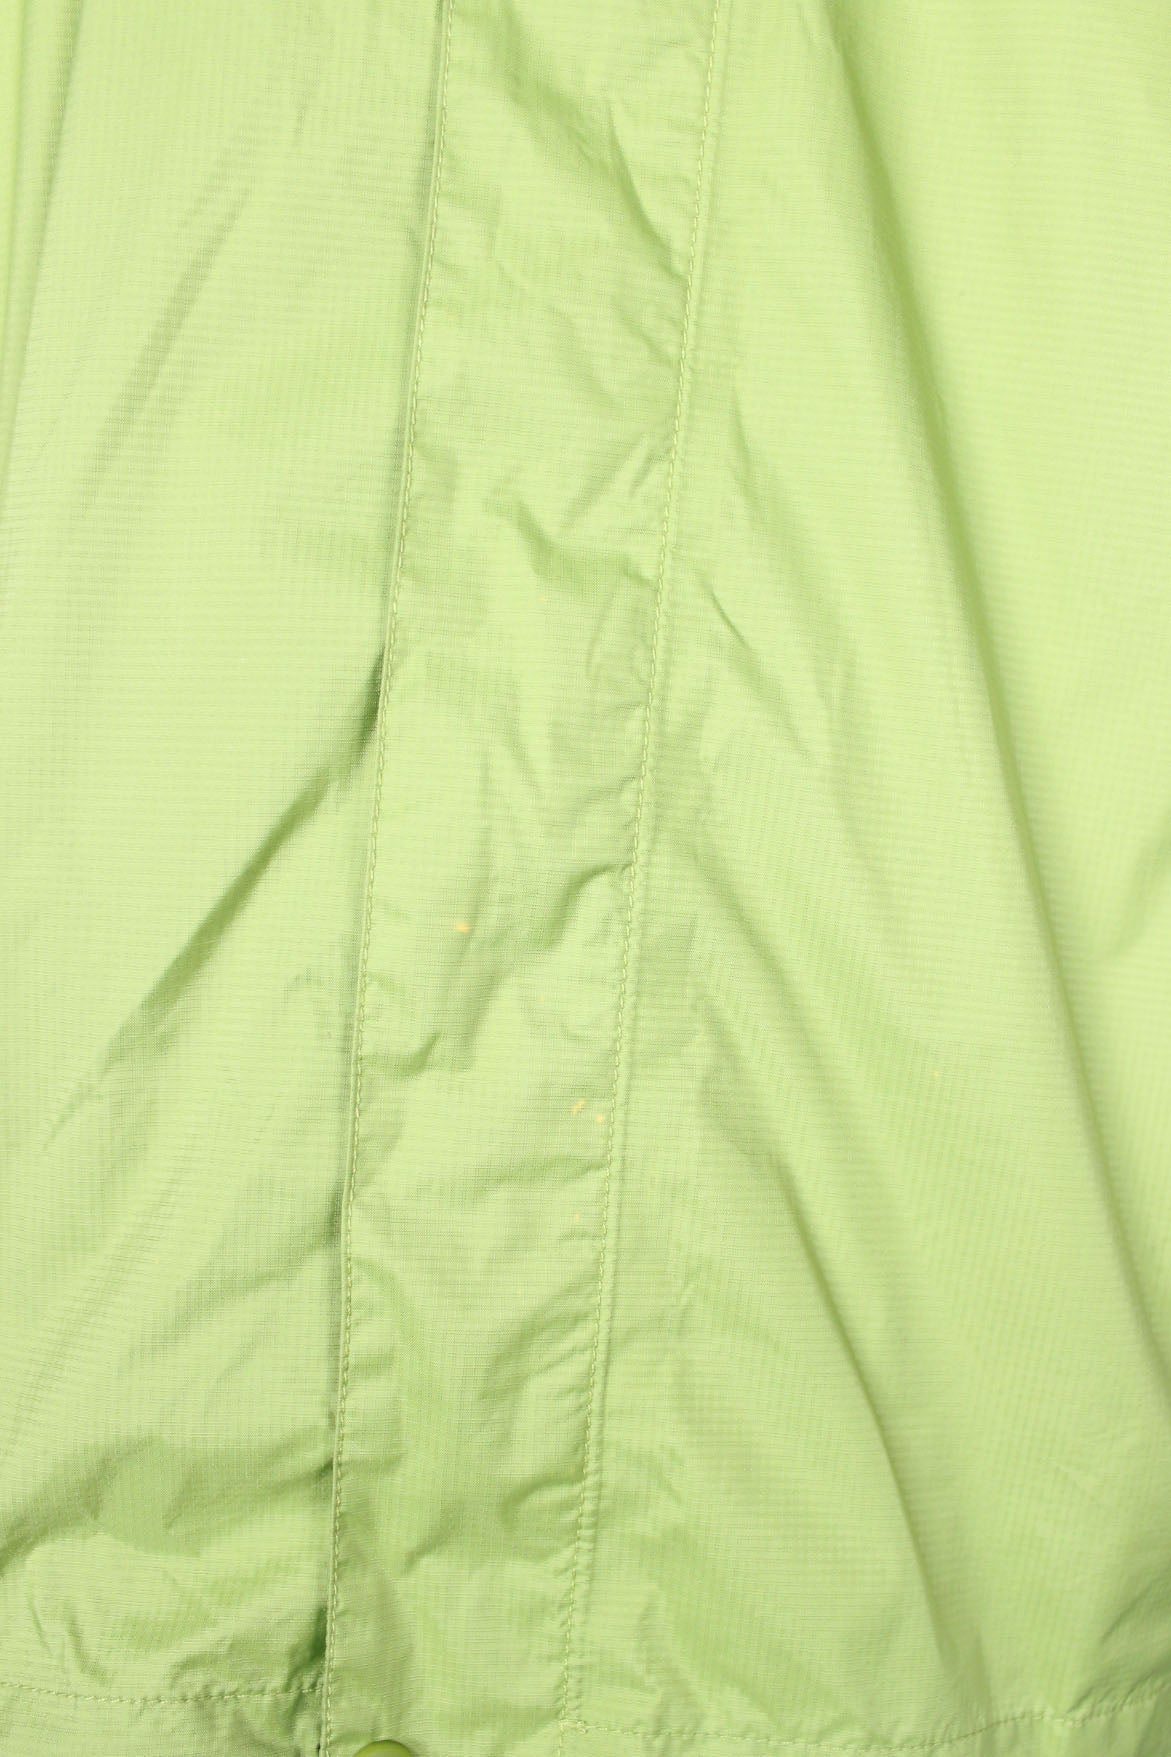 detail view of mark at placket of jacket.